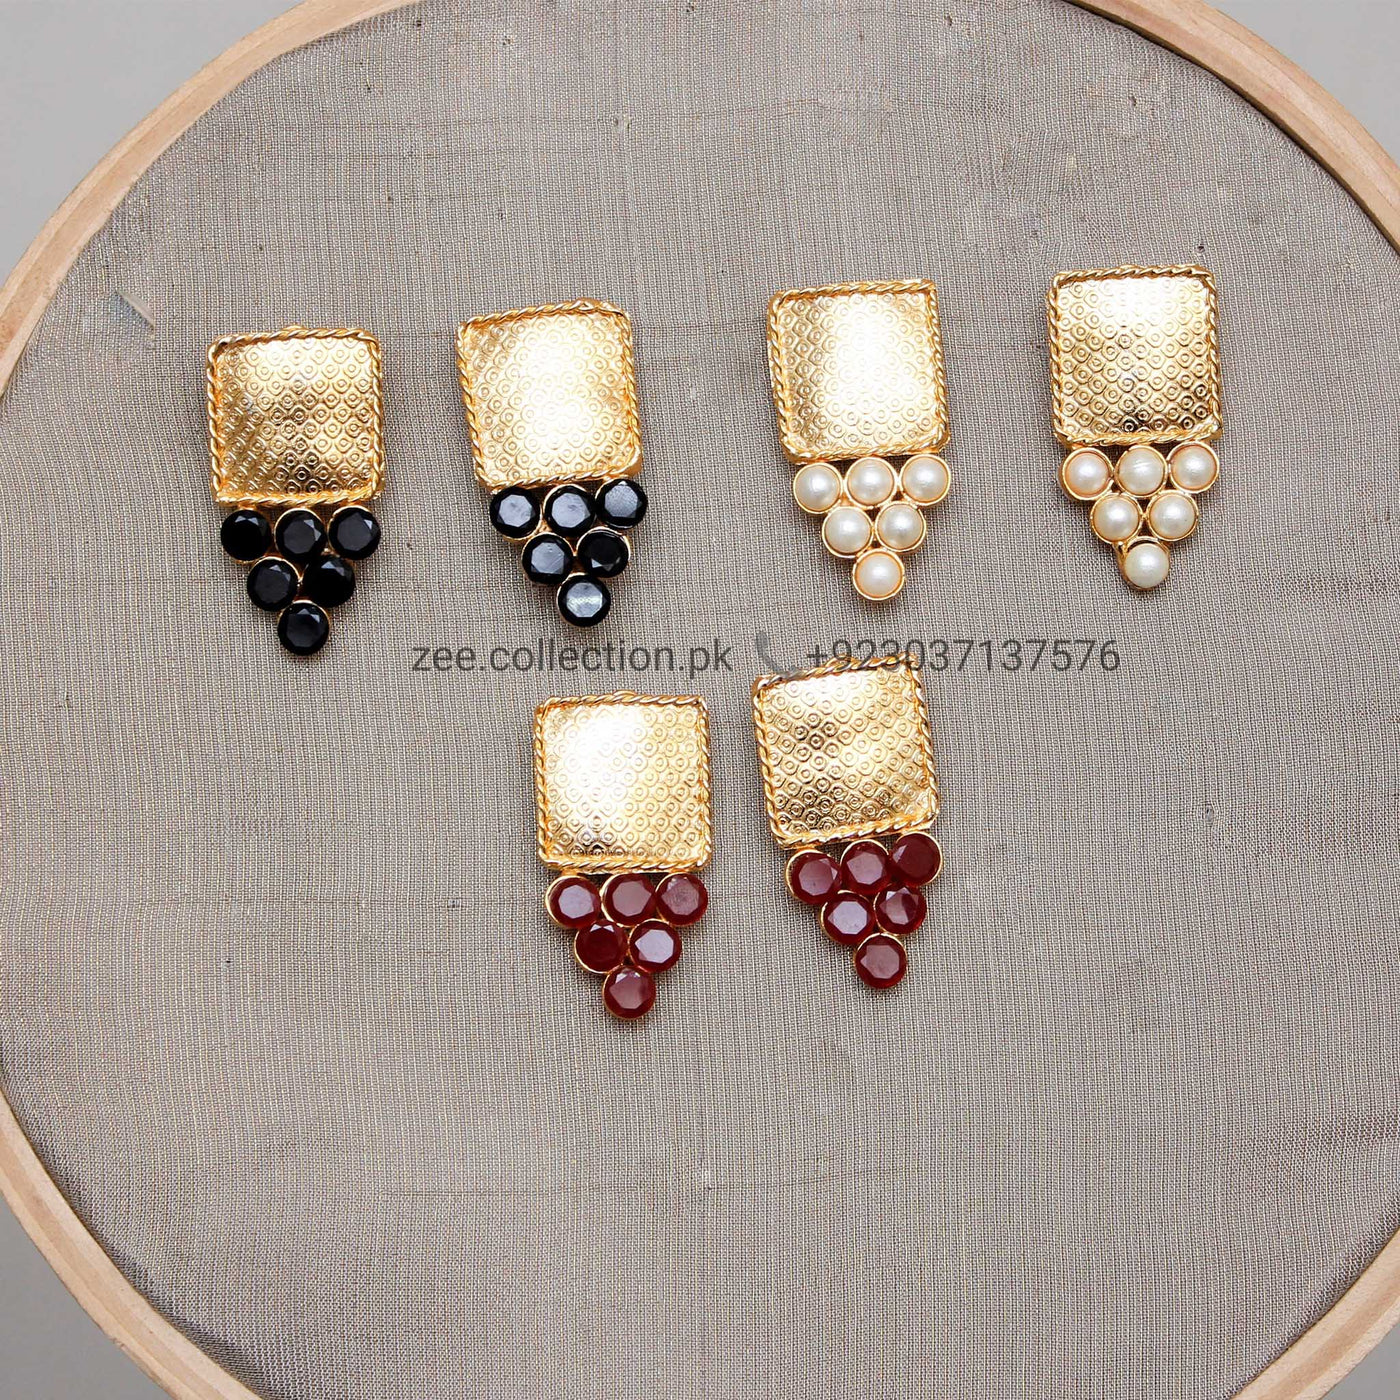 Square Studs Earrings - Zee Collection pk